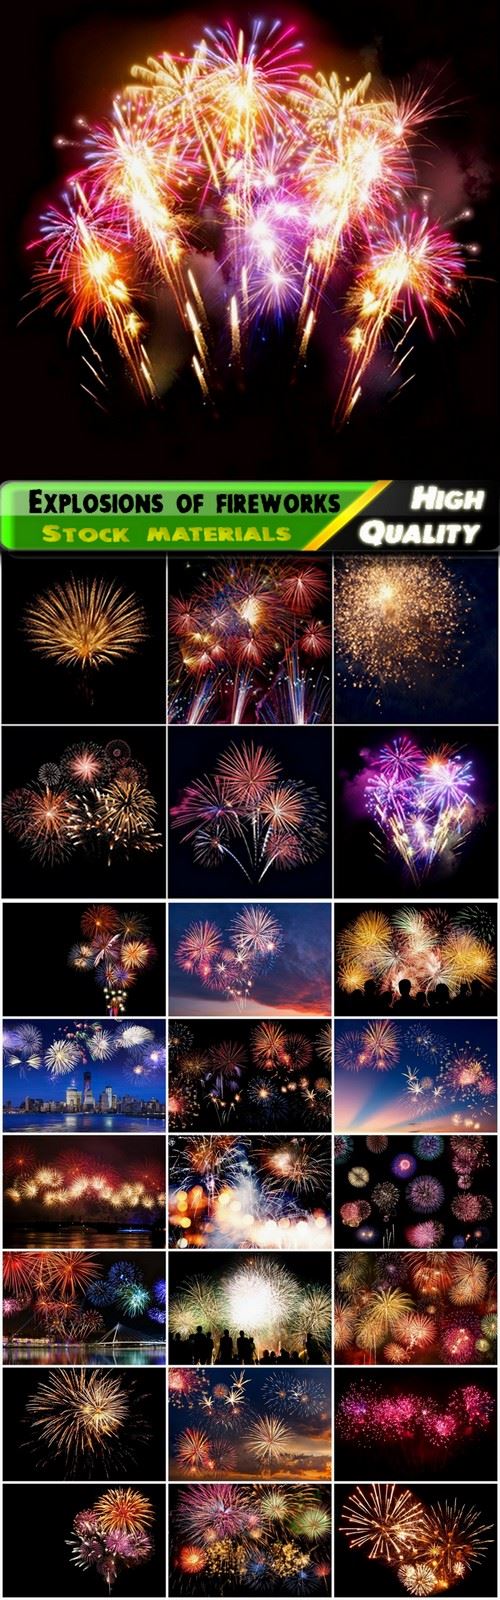 Colorful explosions of fireworks in the night sky - 25 HQ Jpg